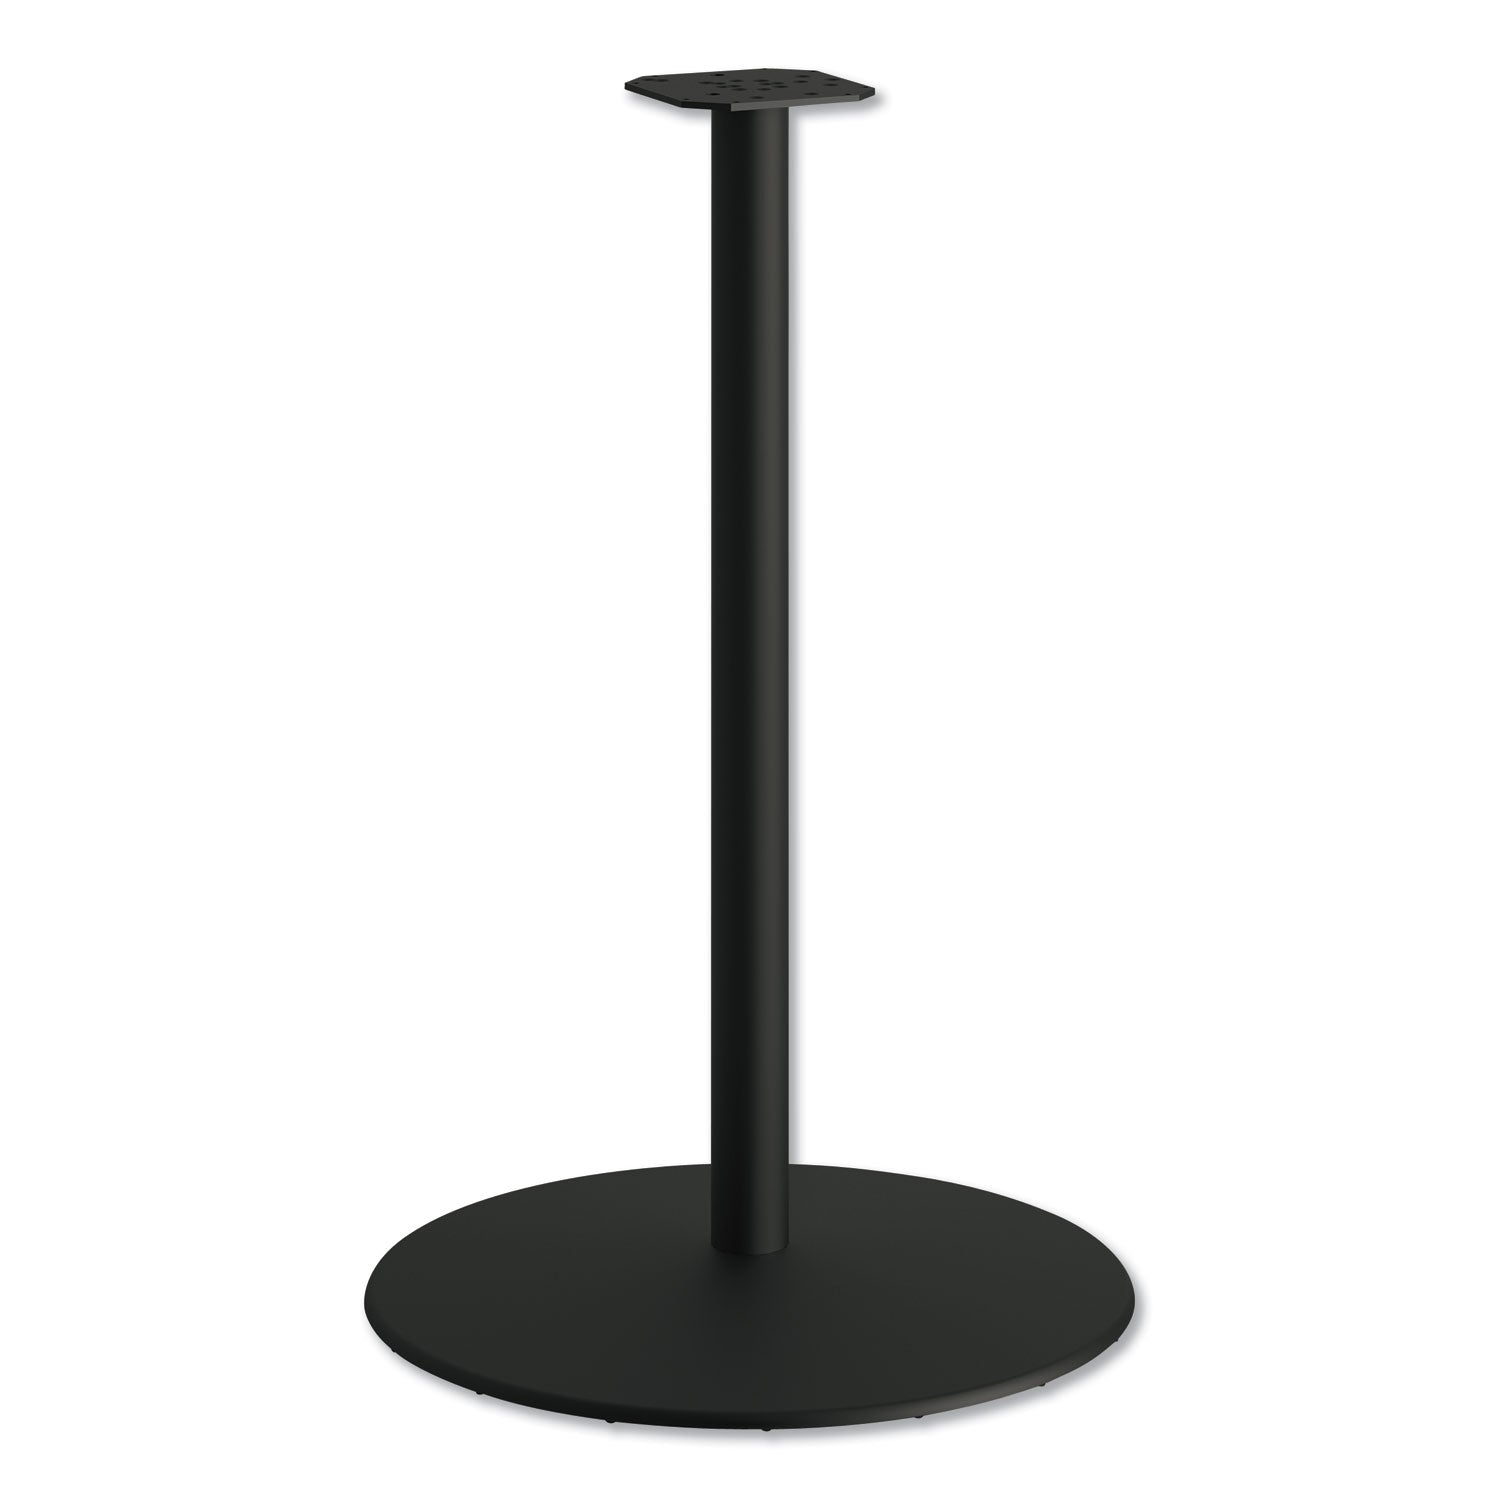 between-round-disc-base-for-42-table-tops-4079-high-black-mica_honhbttd42cbk - 1